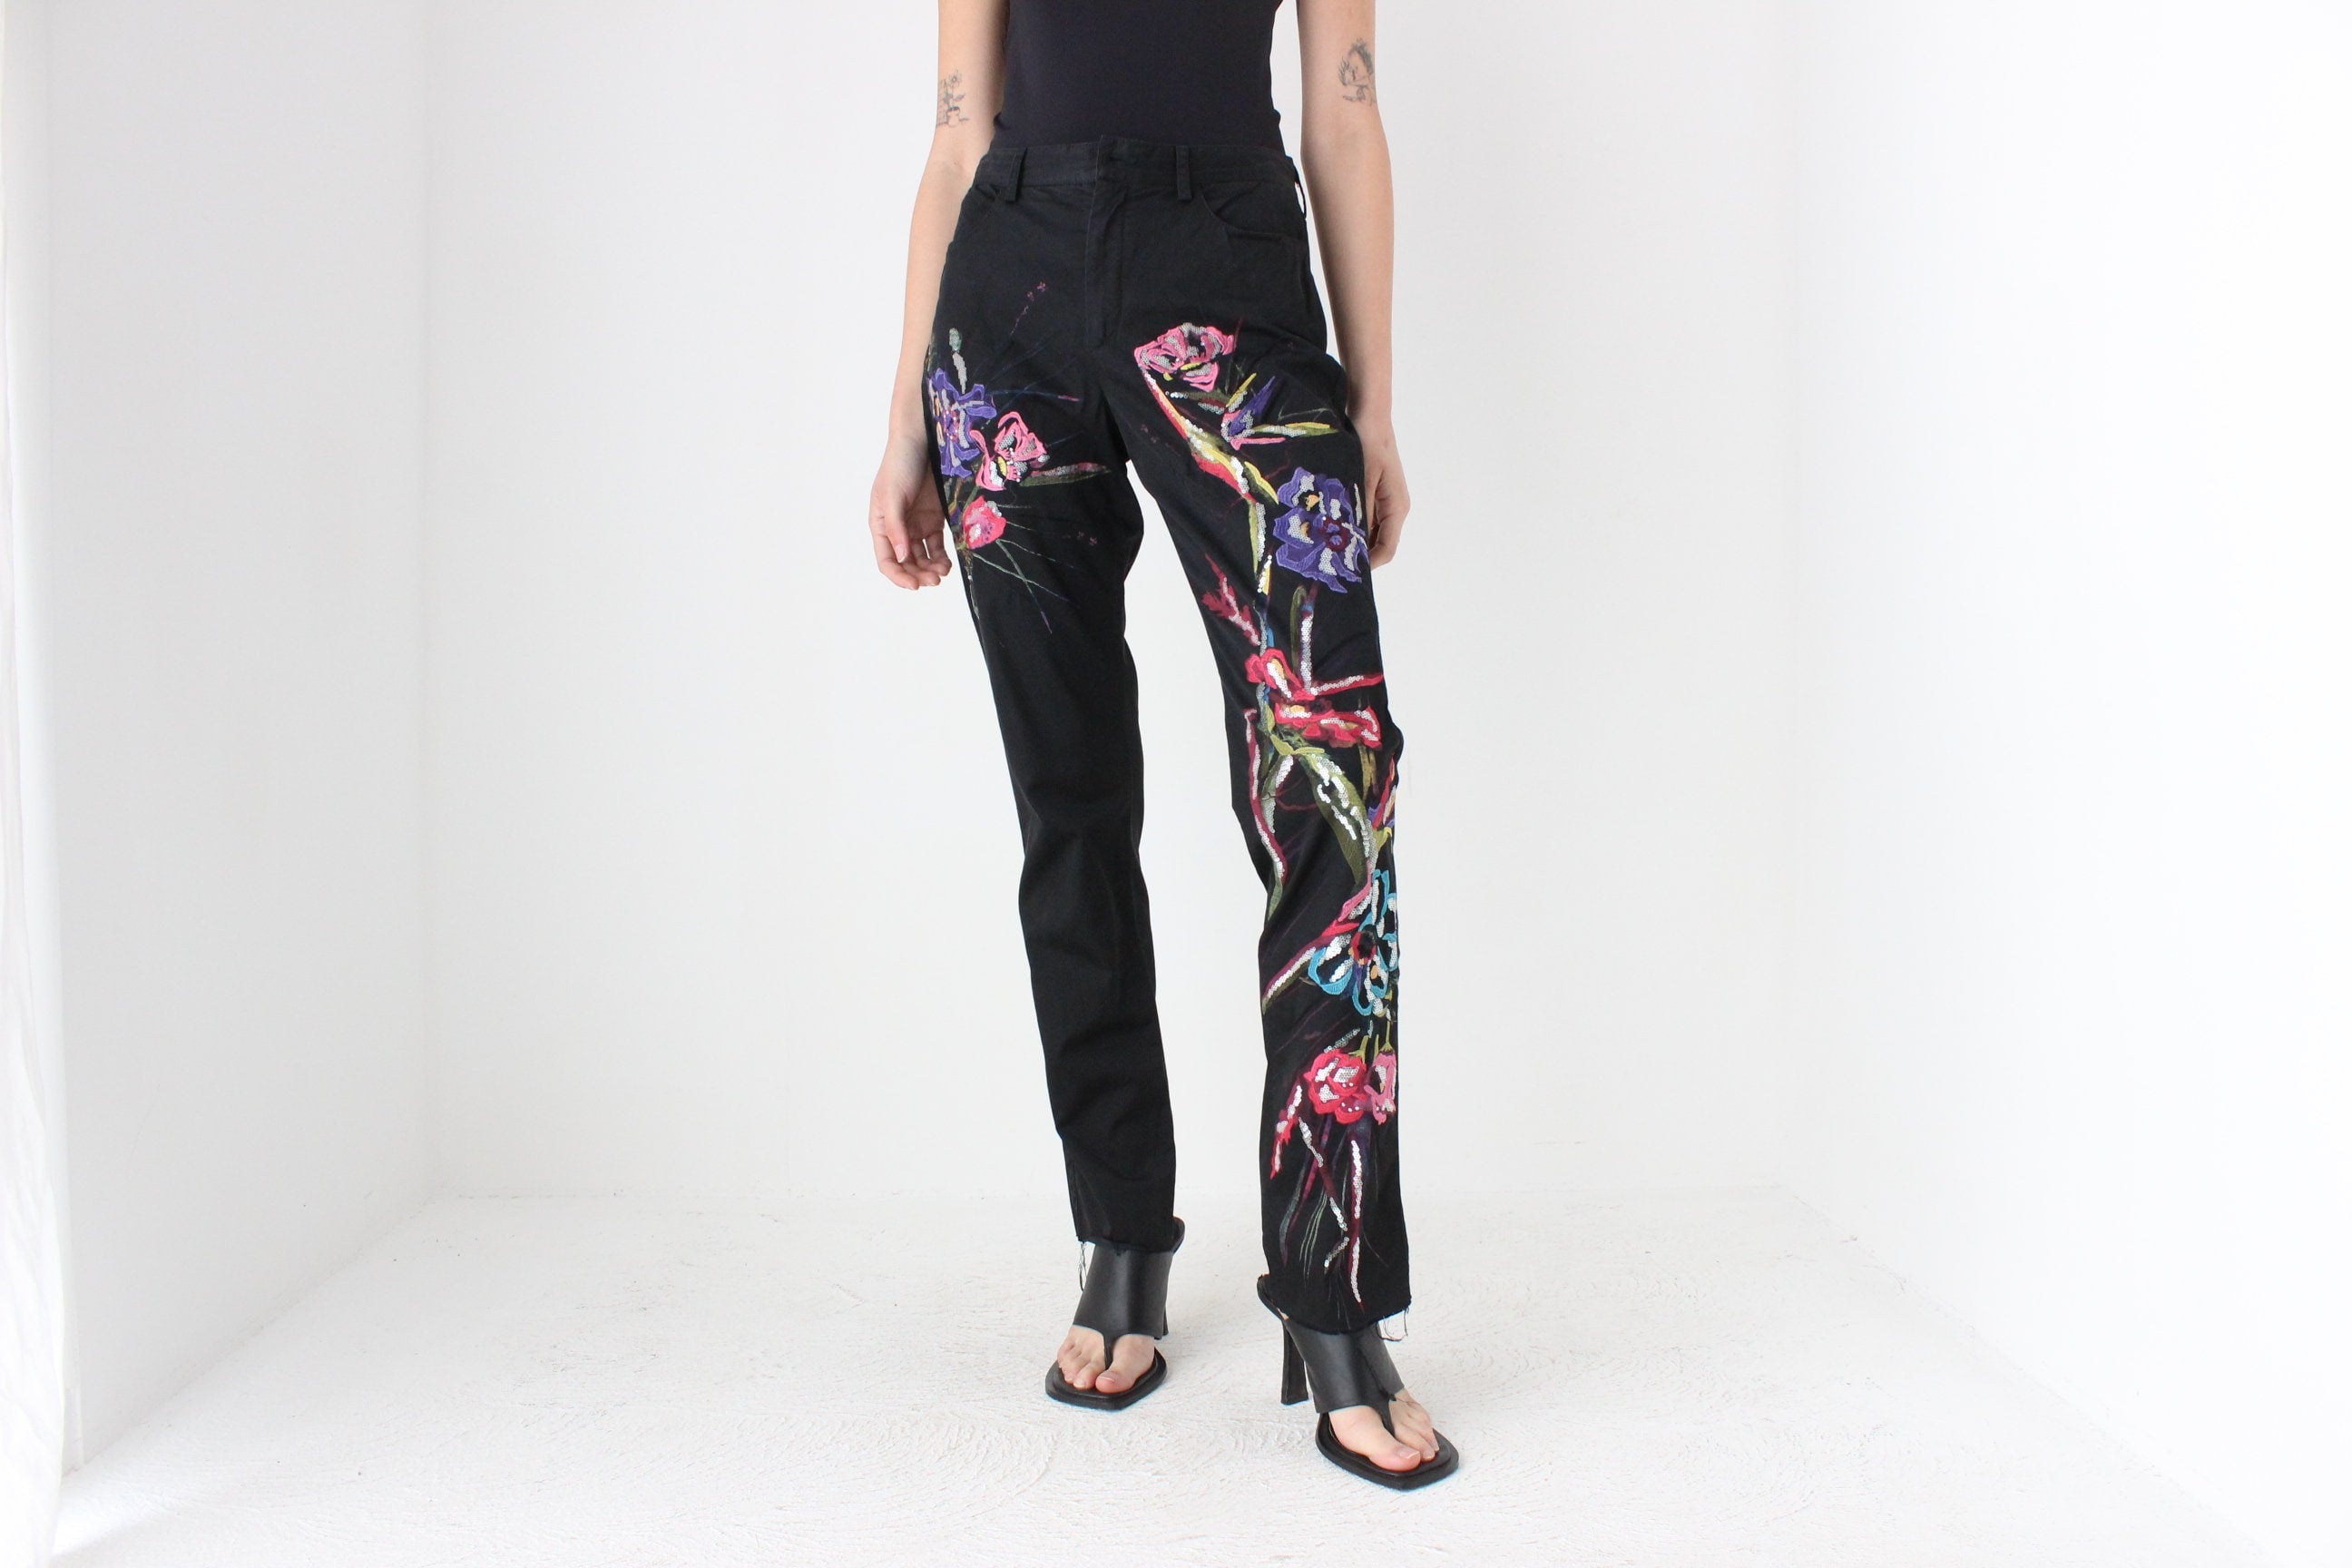 90s Gai Mattiolo Couture Italian Vintage Abstract Satin Jeans